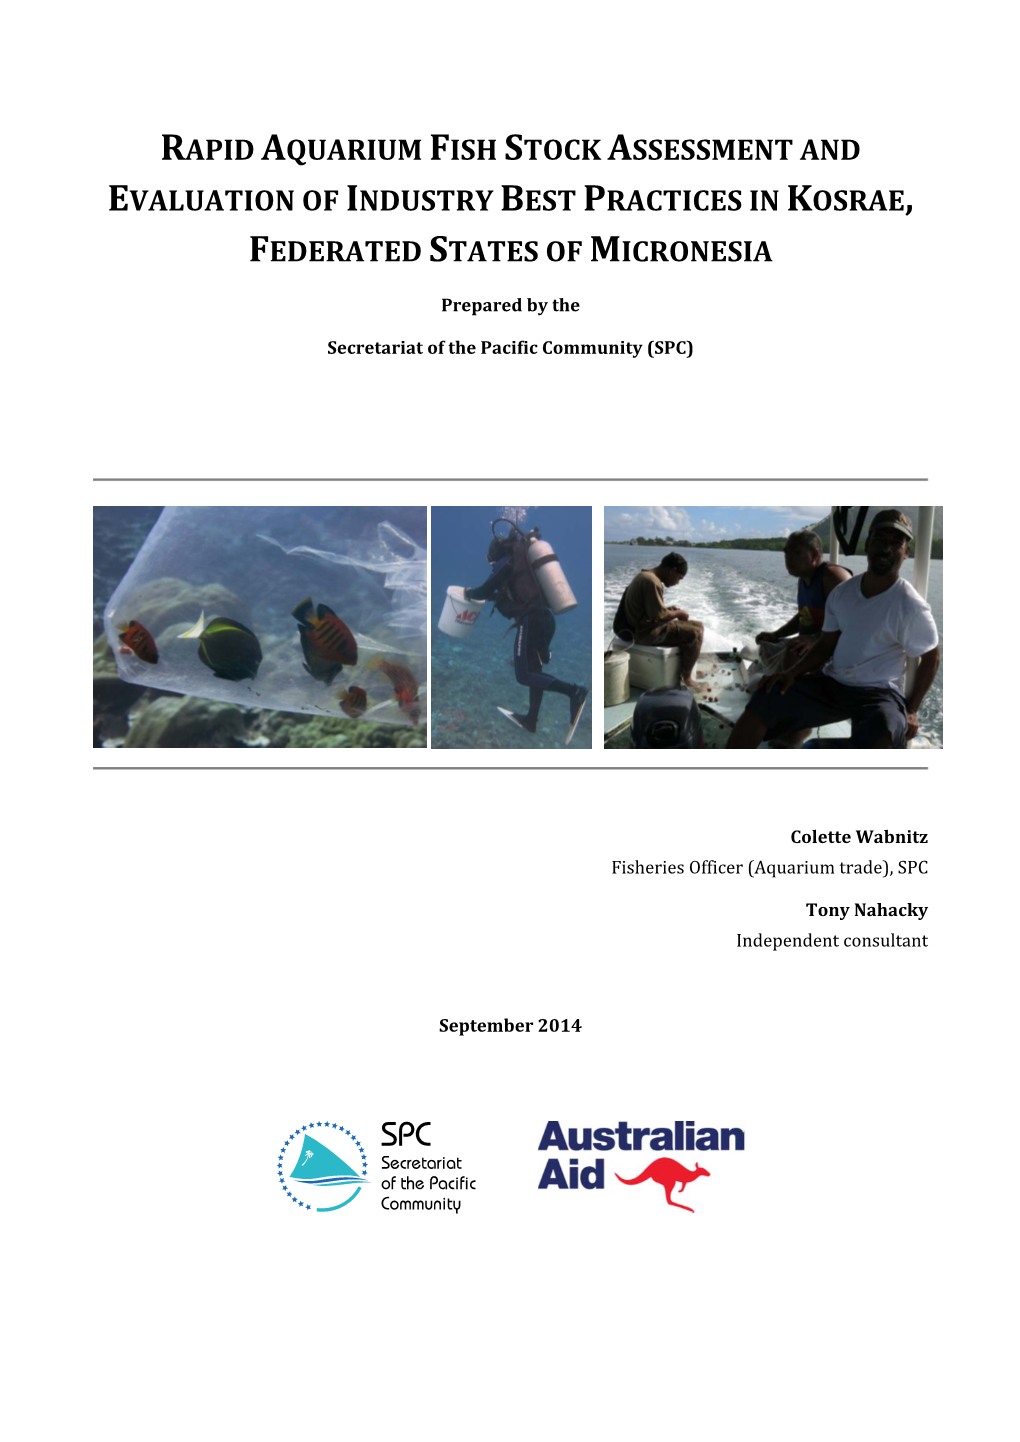 Rapid Aquarium Fish Stock Assessment and Evaluation of Industry Best Practices in Kosrae, Federated States of Micronesia